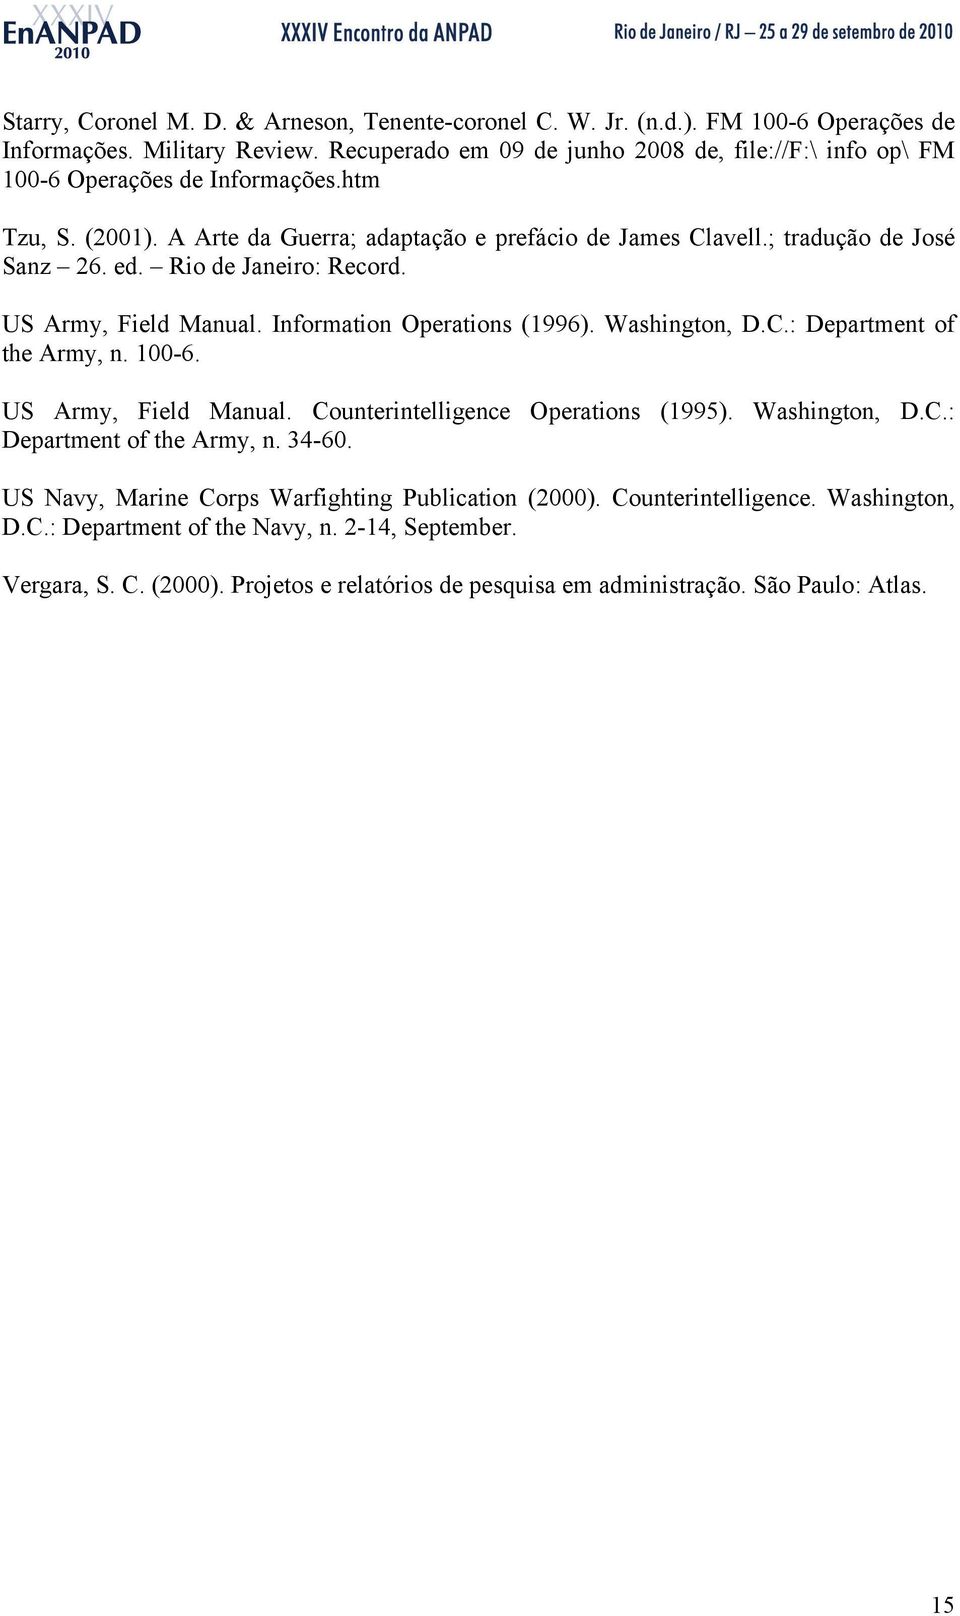 Rio de Janeiro: Record. US Army, Field Manual. Information Operations (1996). Washington, D.C.: Department of the Army, n. 100-6. US Army, Field Manual. Counterintelligence Operations (1995).